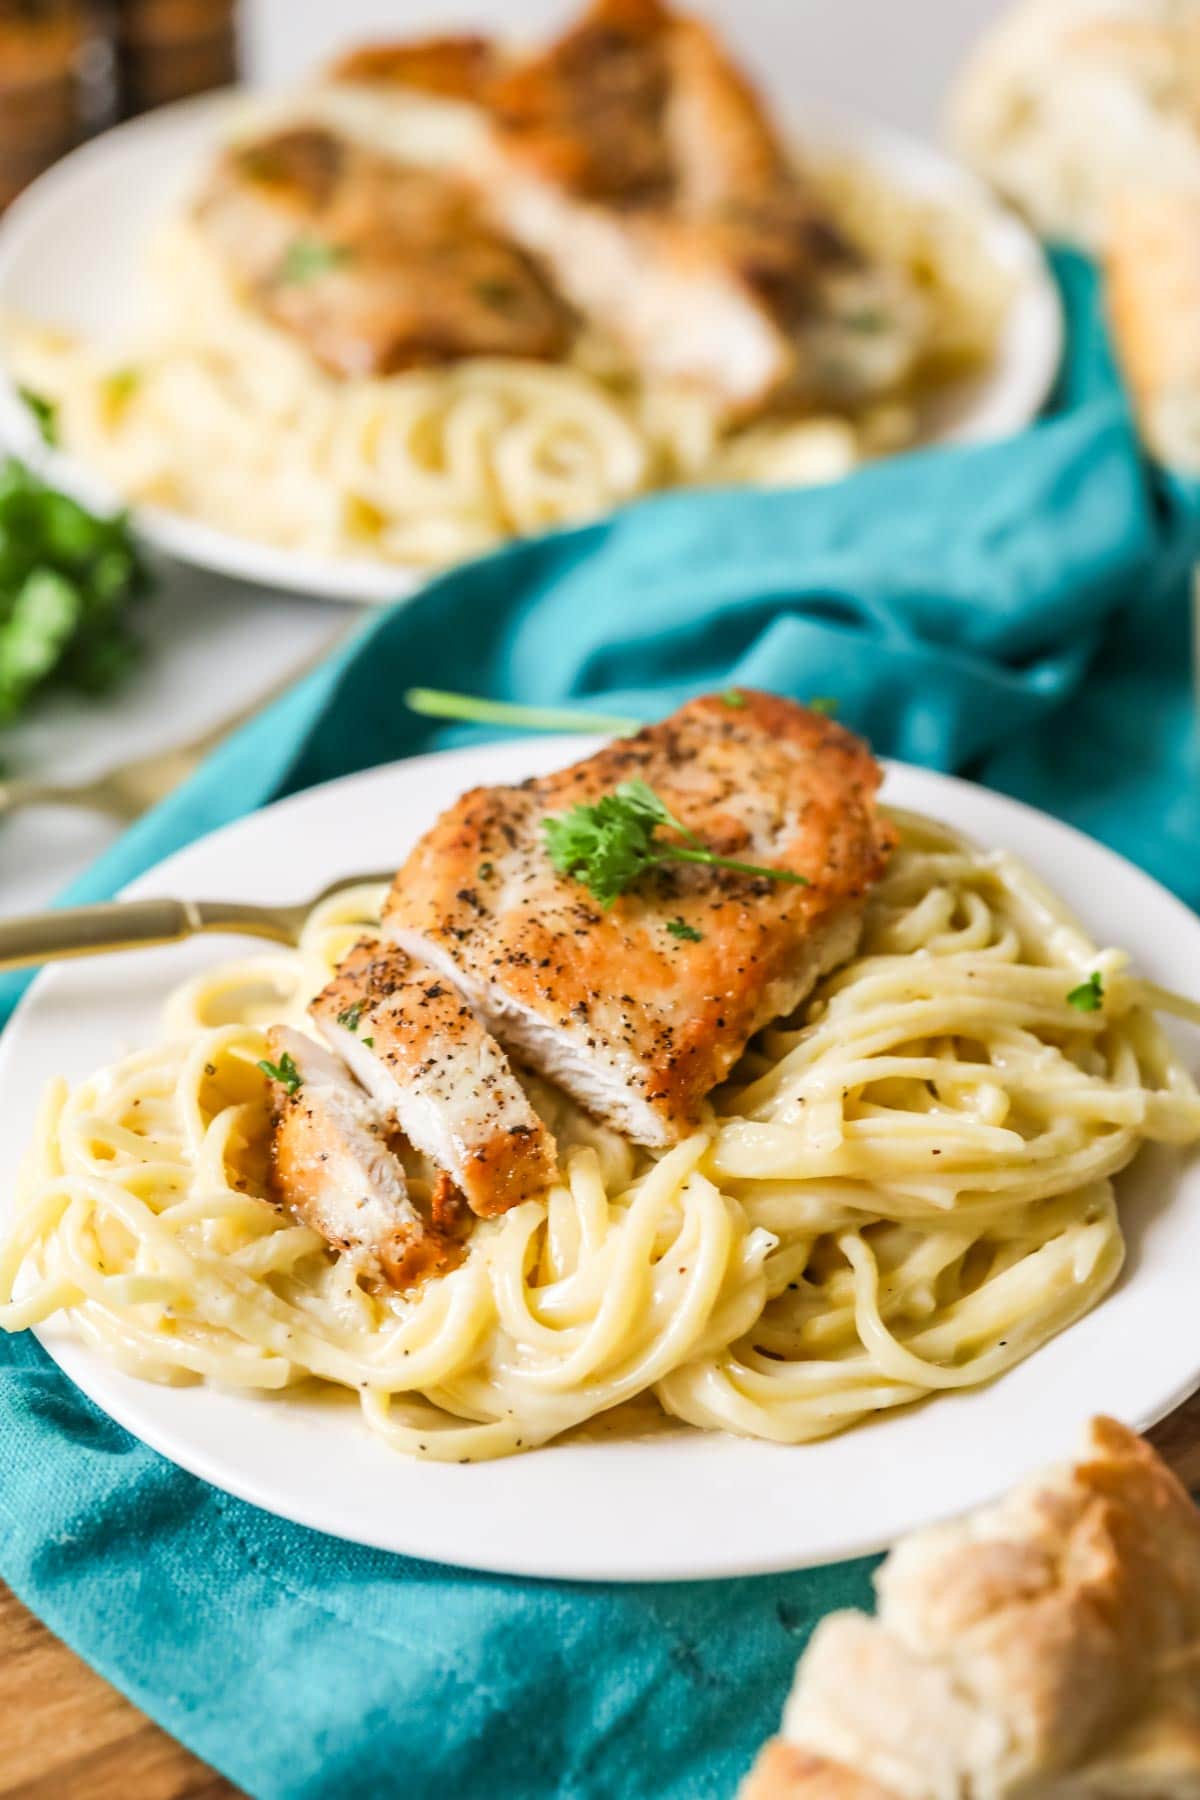 Plate of pasta topped with alfredo sauce and a seared chicken breast that's been cut into two bites.